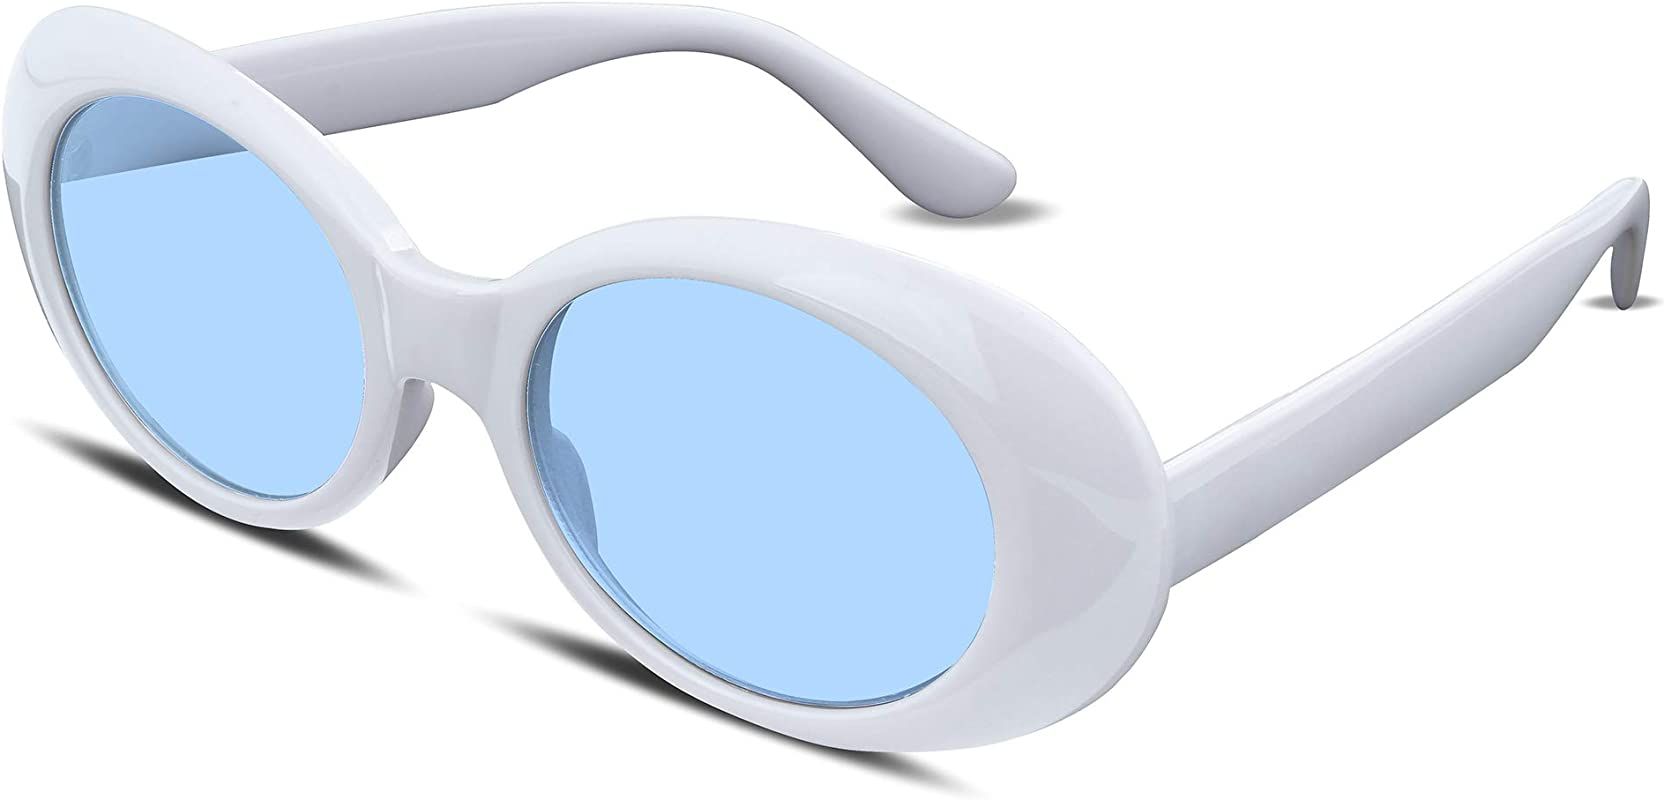 FEISEDY White Clout Goggles Sunglasses Women Men Retro Oval Sunglasses Girls Boys Sunglasses B225... | Amazon (US)